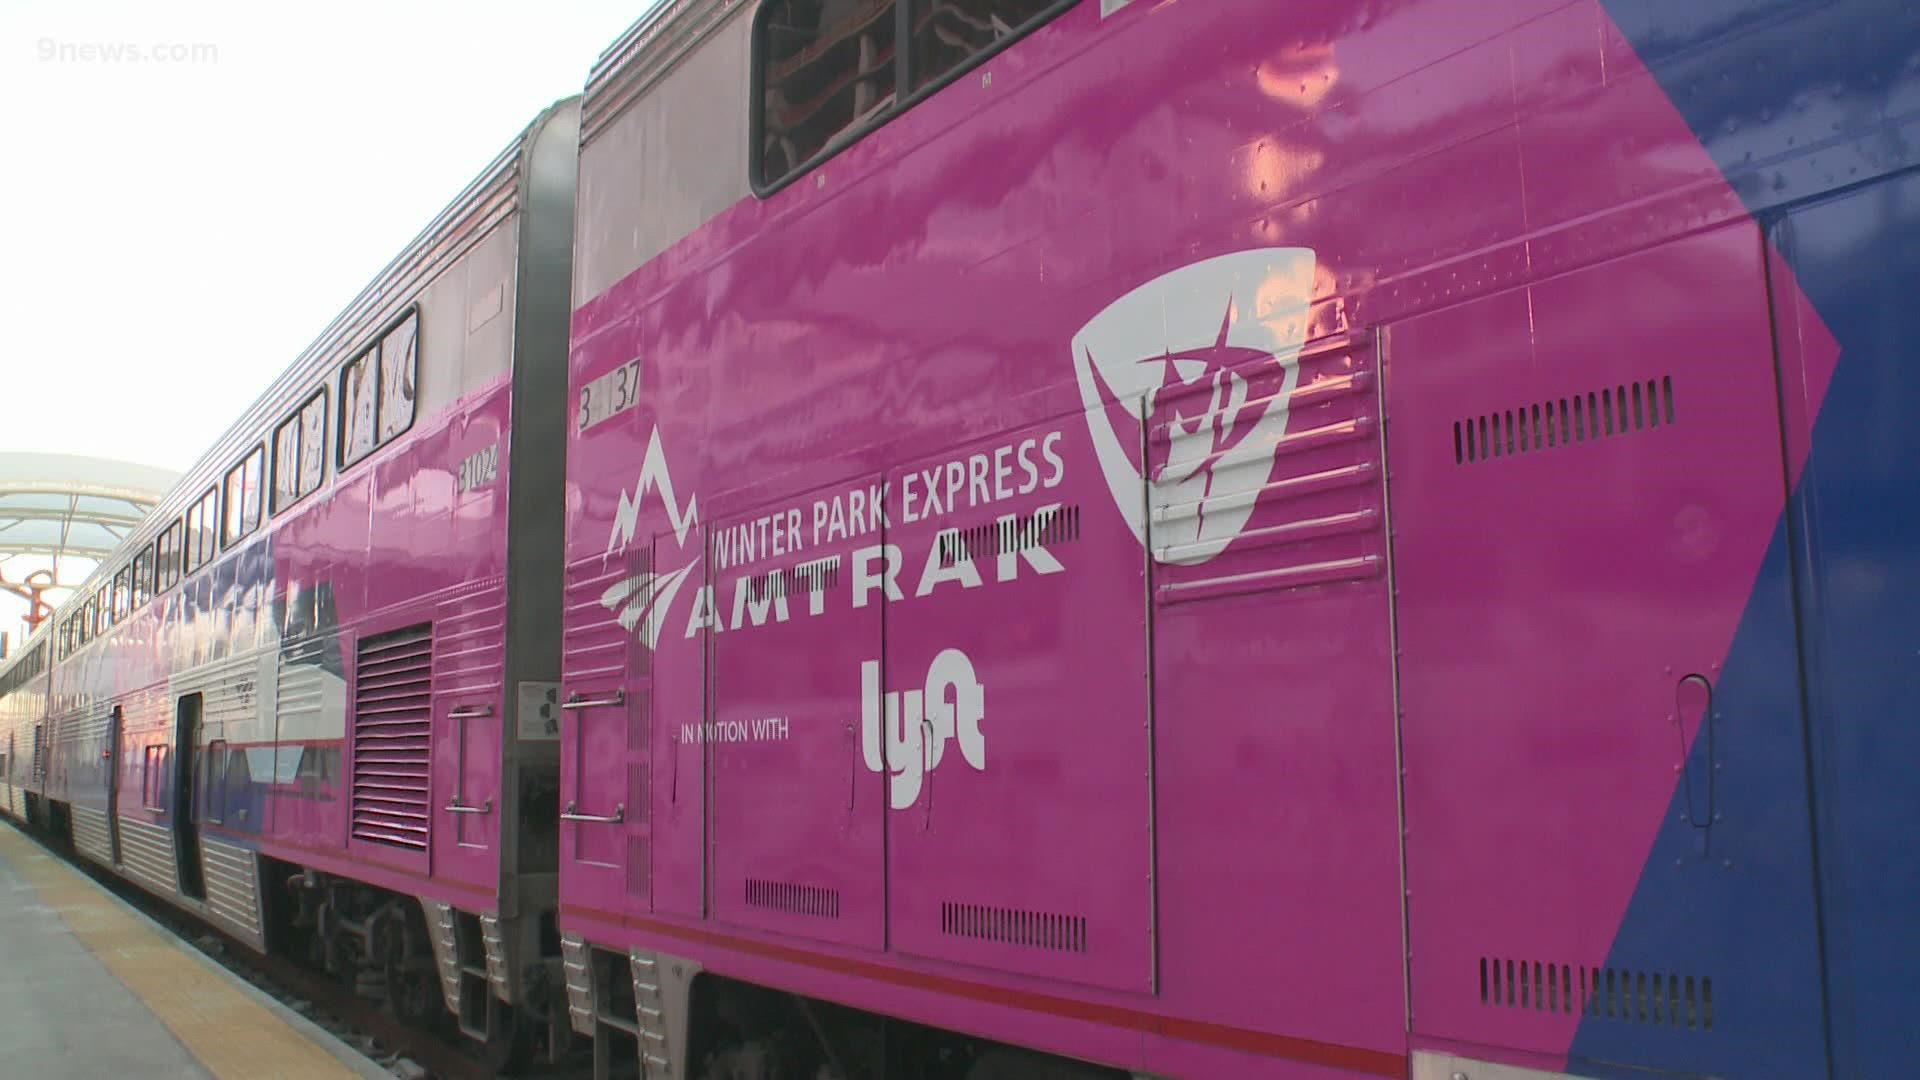 The ski train will offer weekend service between Union Station and Winter Park beginning in January.